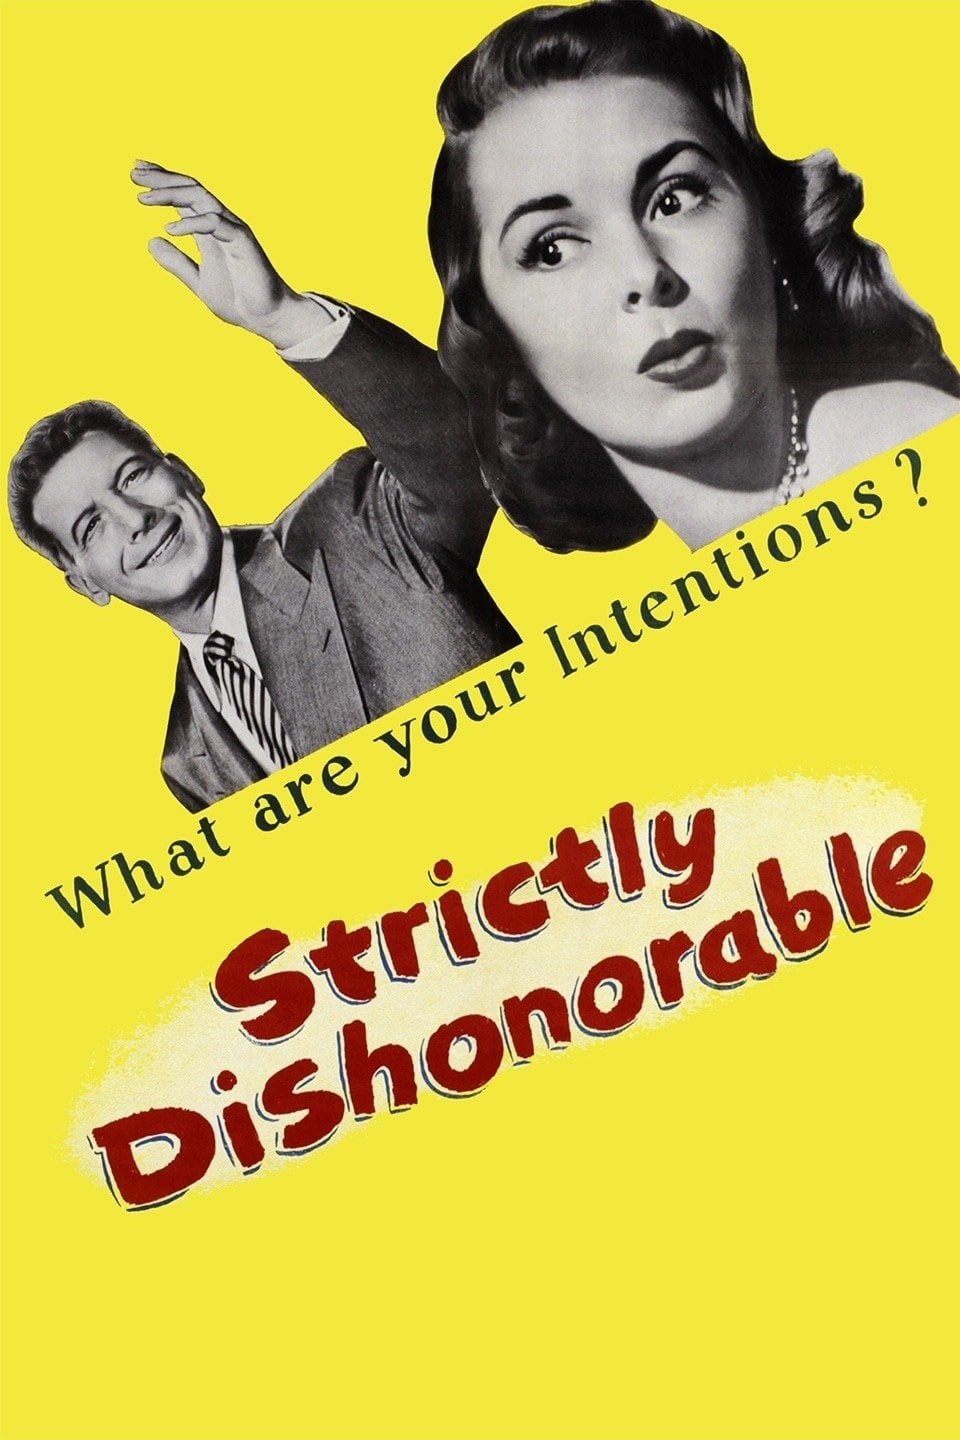 Strictly Dishonorable